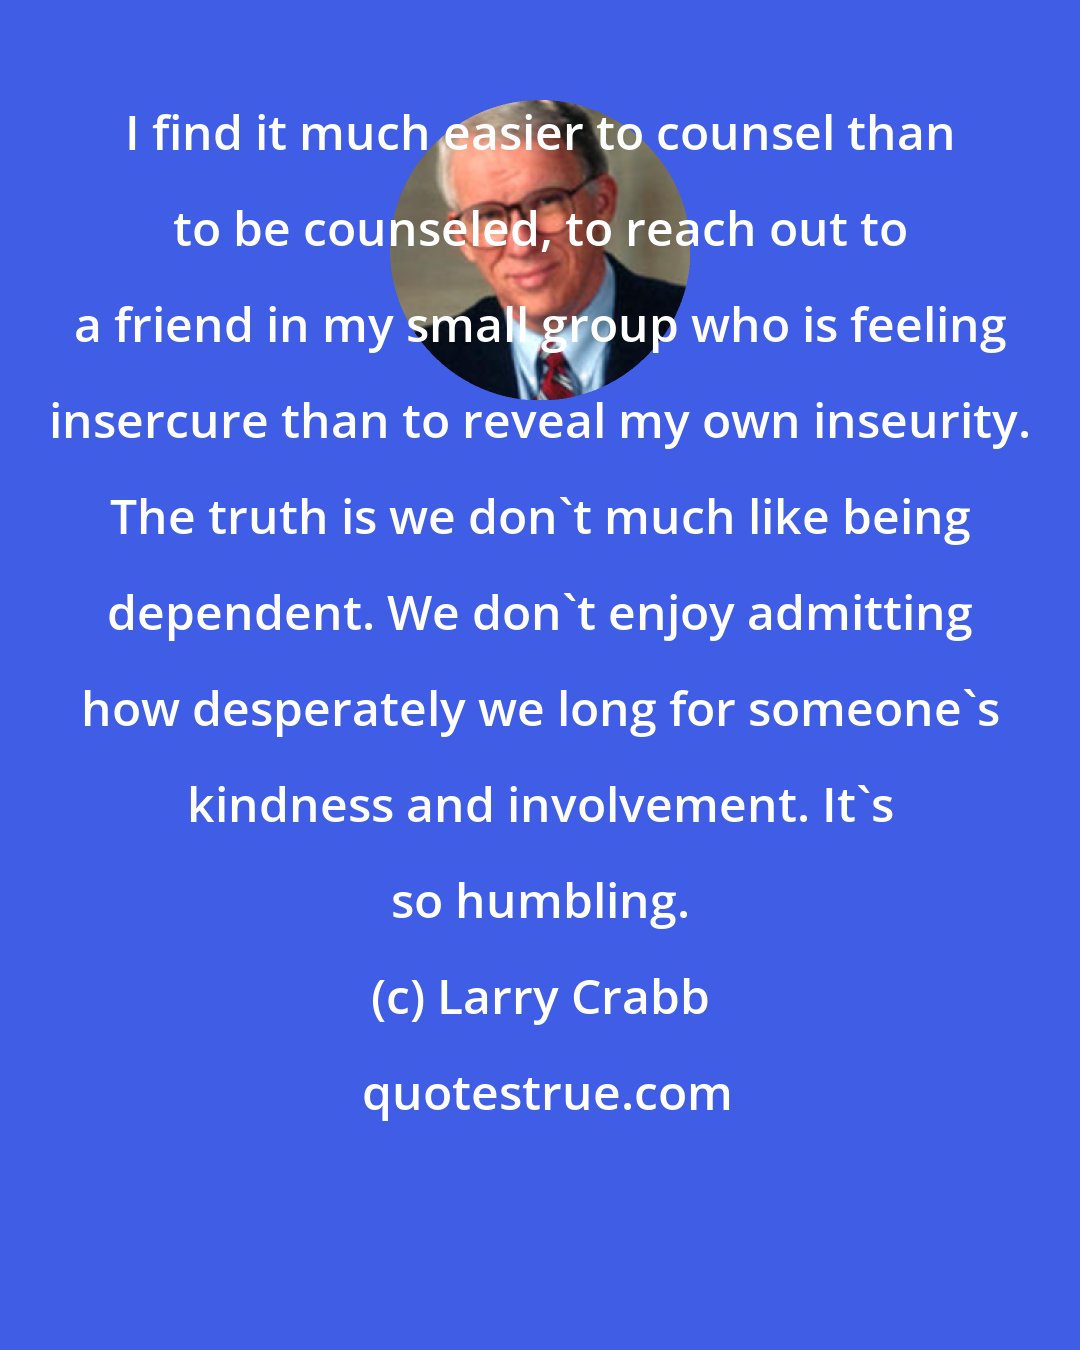 Larry Crabb: I find it much easier to counsel than to be counseled, to reach out to a friend in my small group who is feeling insercure than to reveal my own inseurity. The truth is we don't much like being dependent. We don't enjoy admitting how desperately we long for someone's kindness and involvement. It's so humbling.